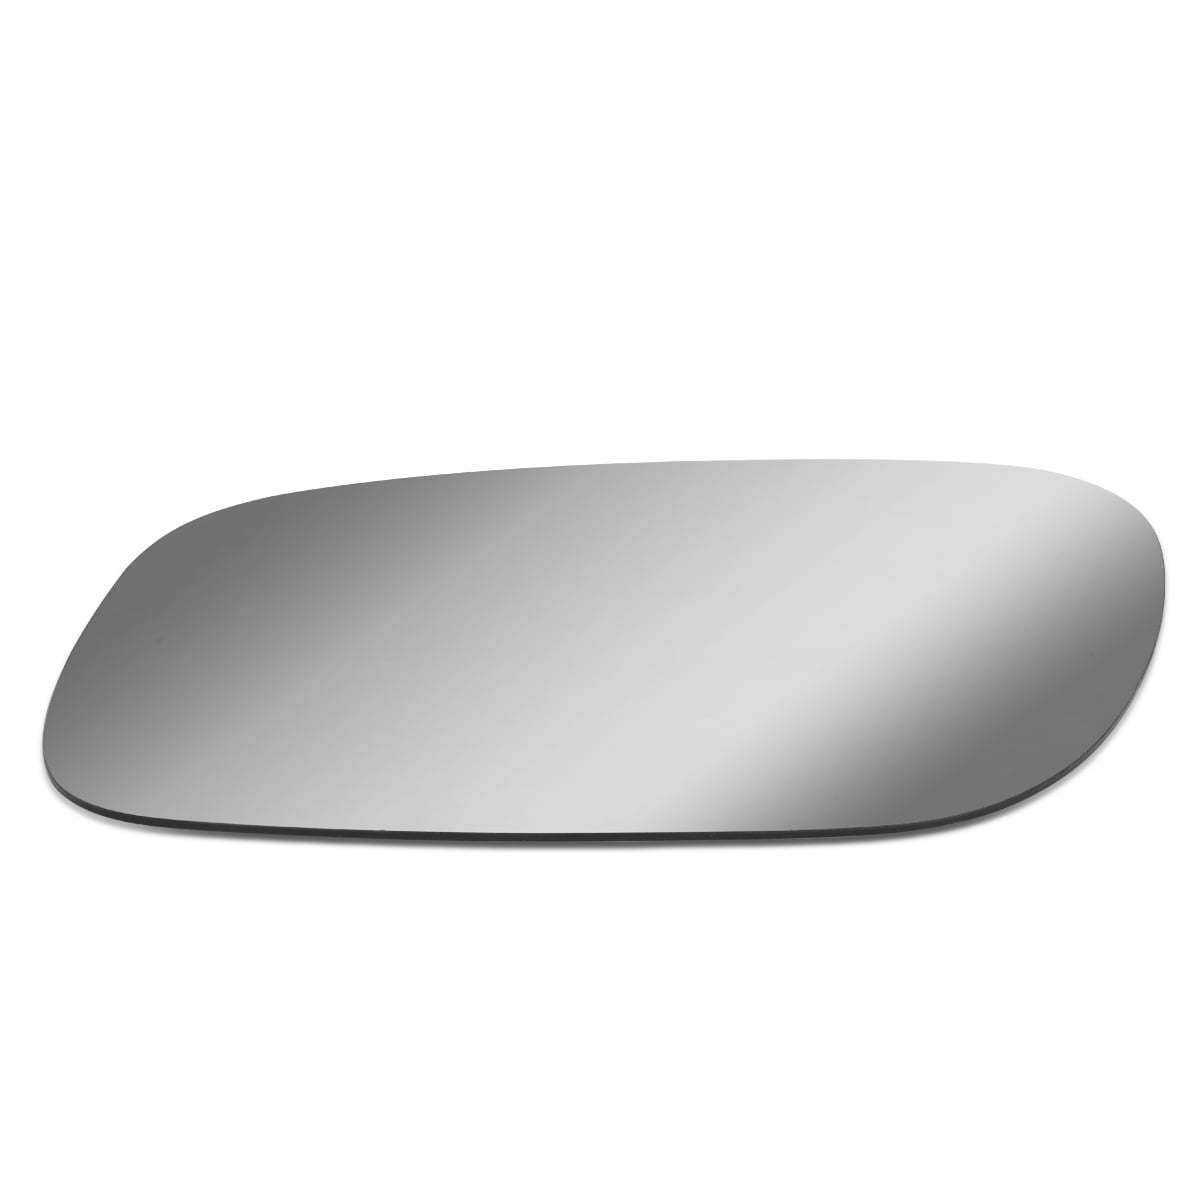 DNA Motoring SMP-070-R Right/Passenger Side Door Rear View Mirror Glass Lens 